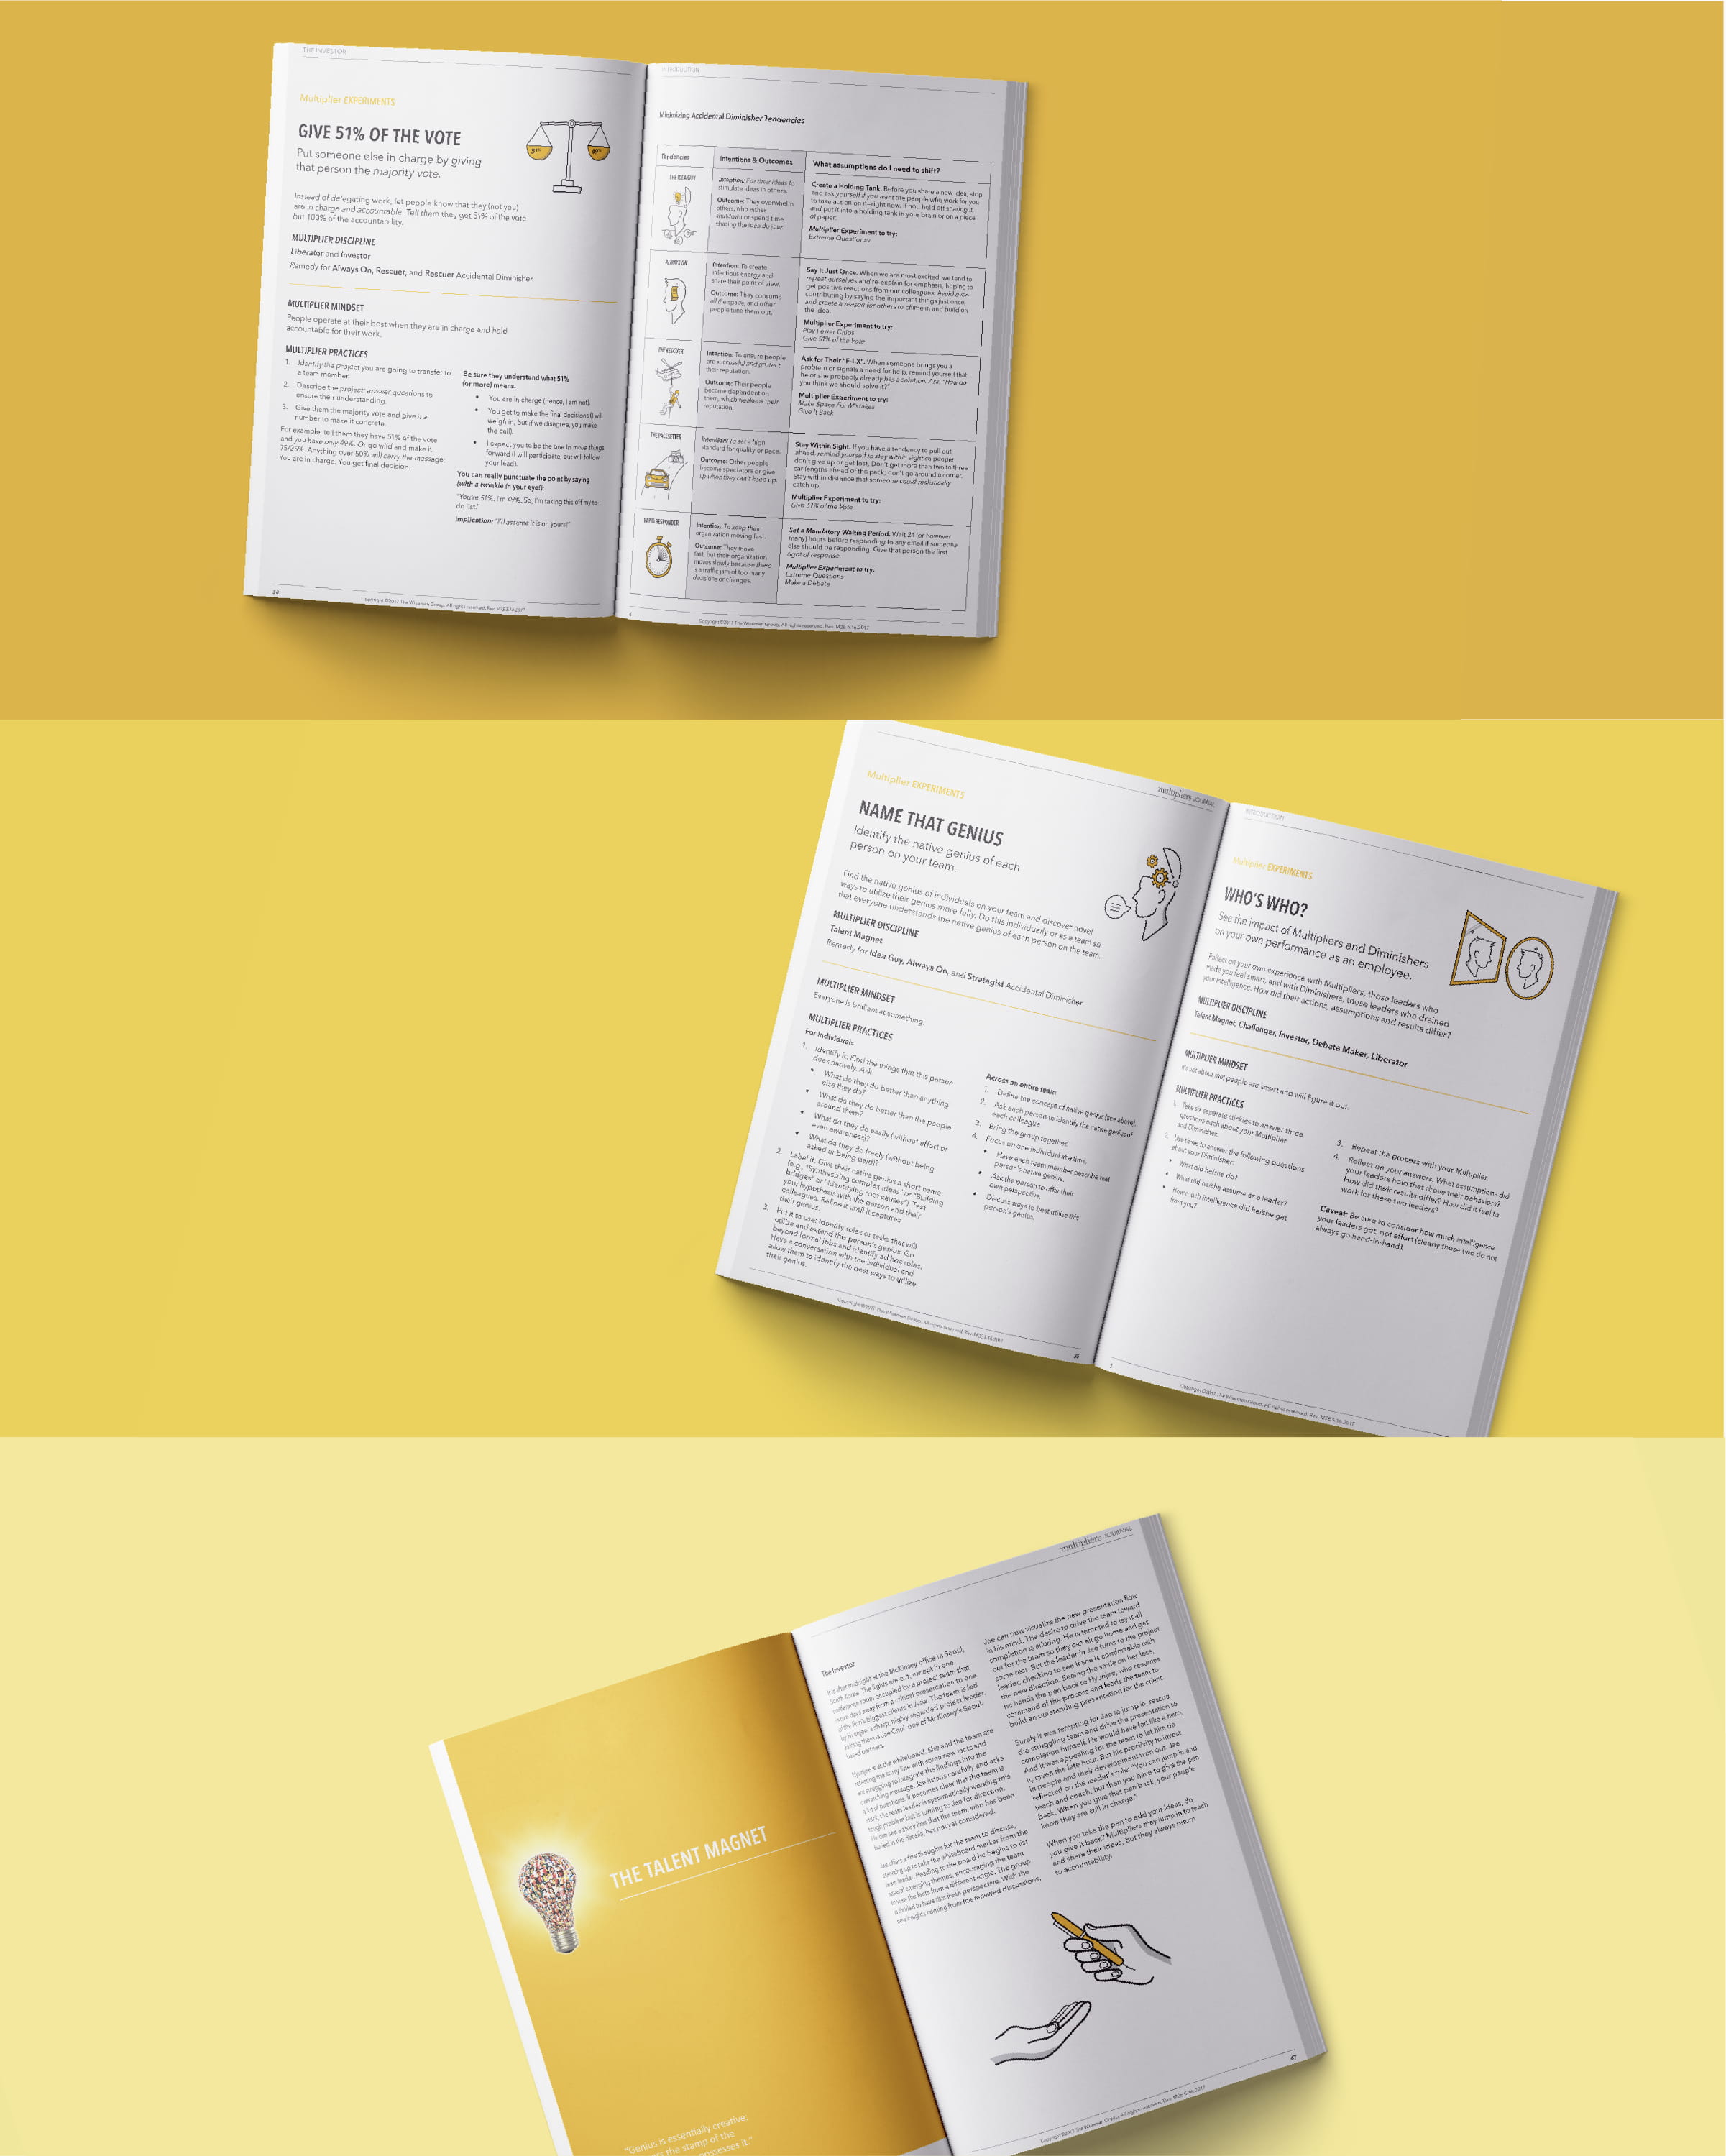 Images of Multipliers book interior pages